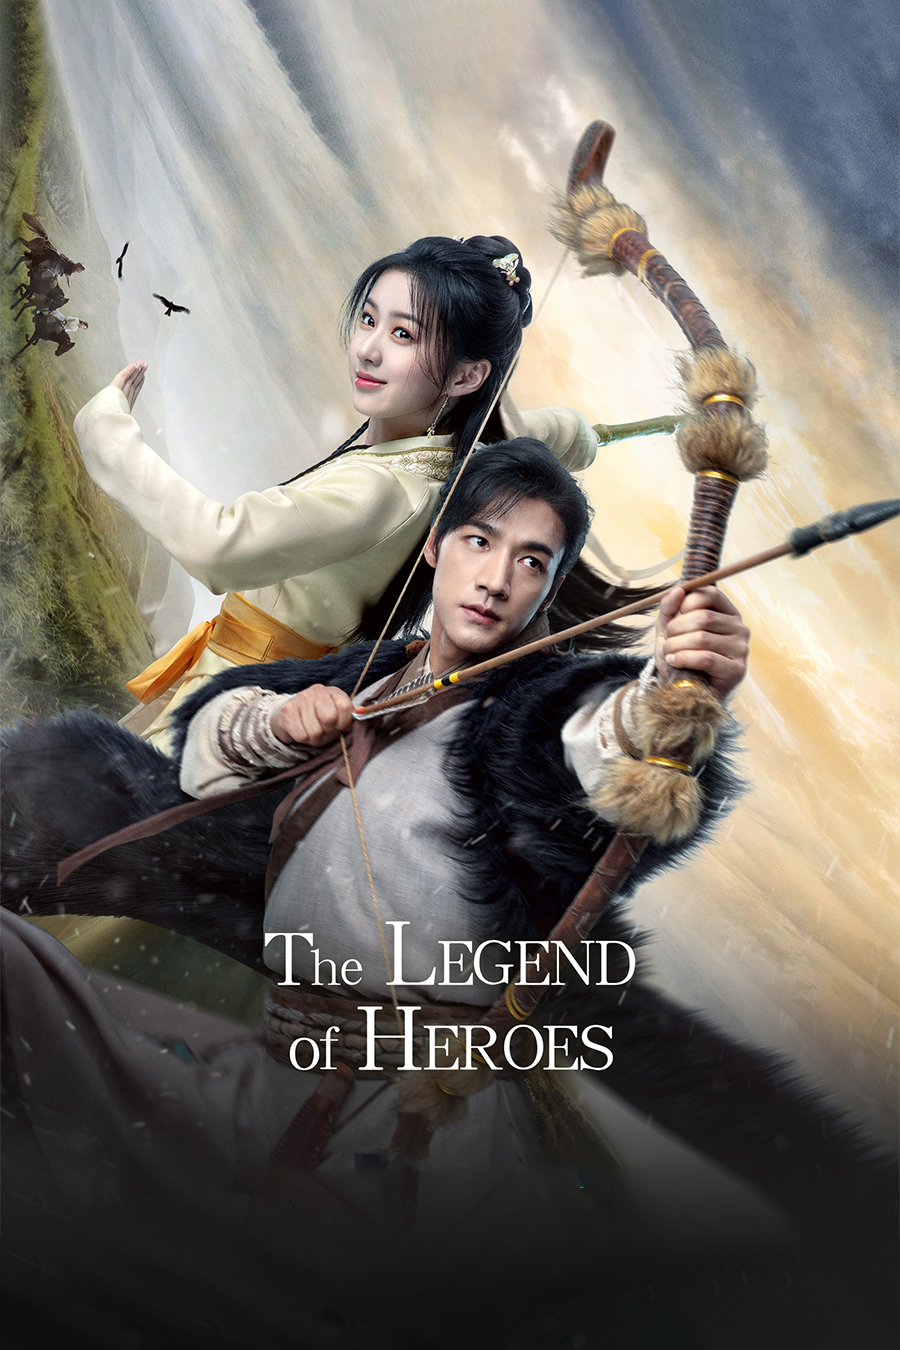 [26] The Legend of Heroes